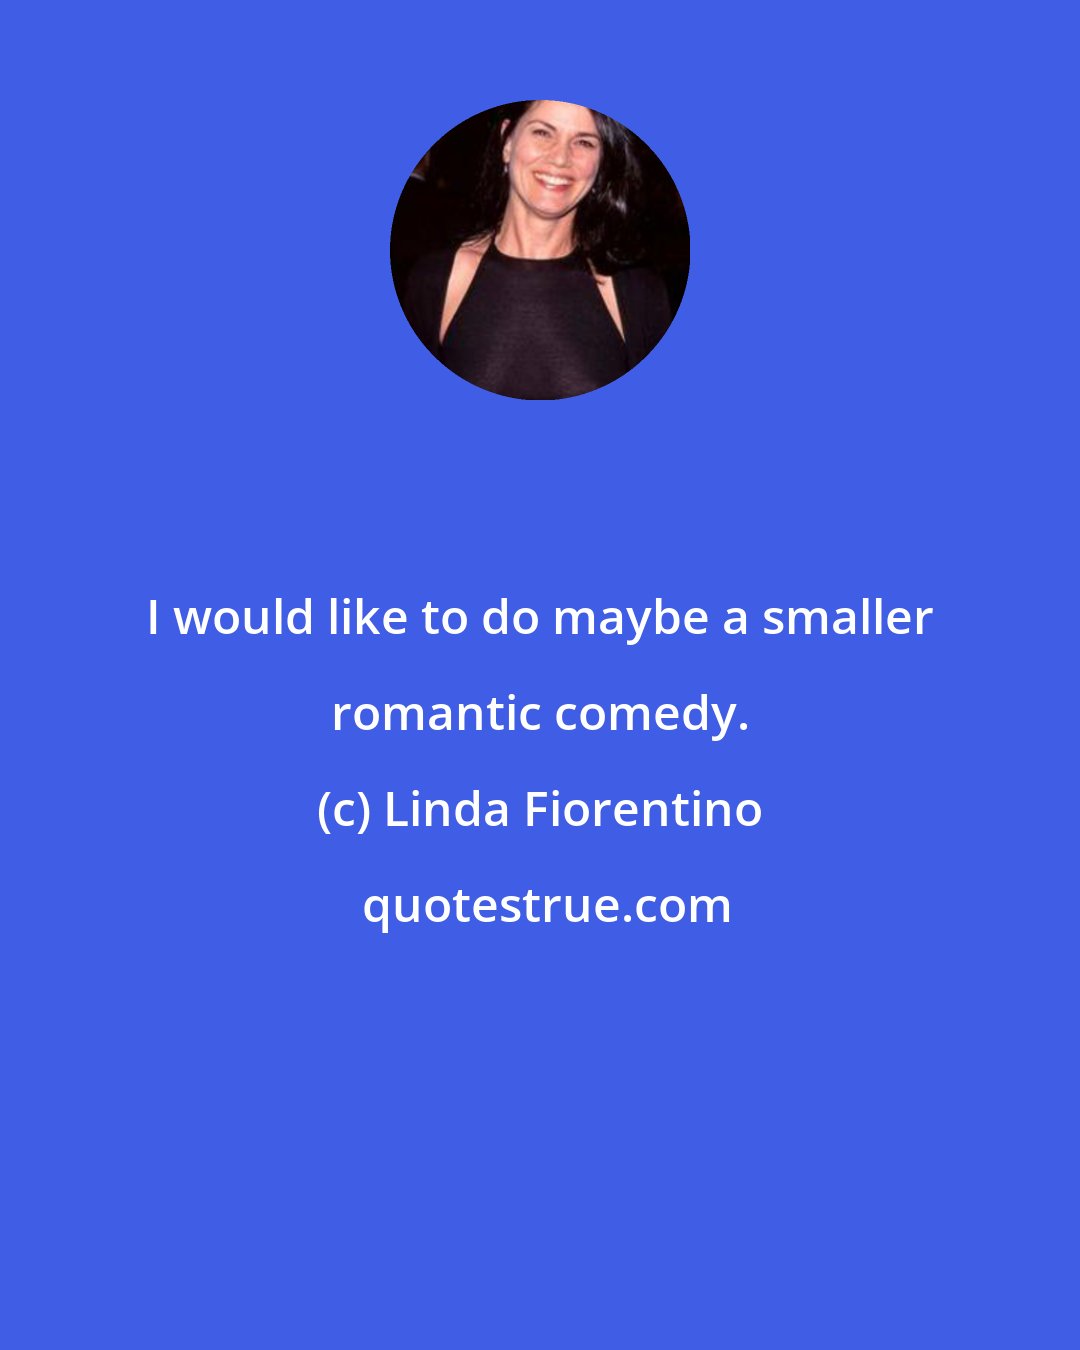 Linda Fiorentino: I would like to do maybe a smaller romantic comedy.